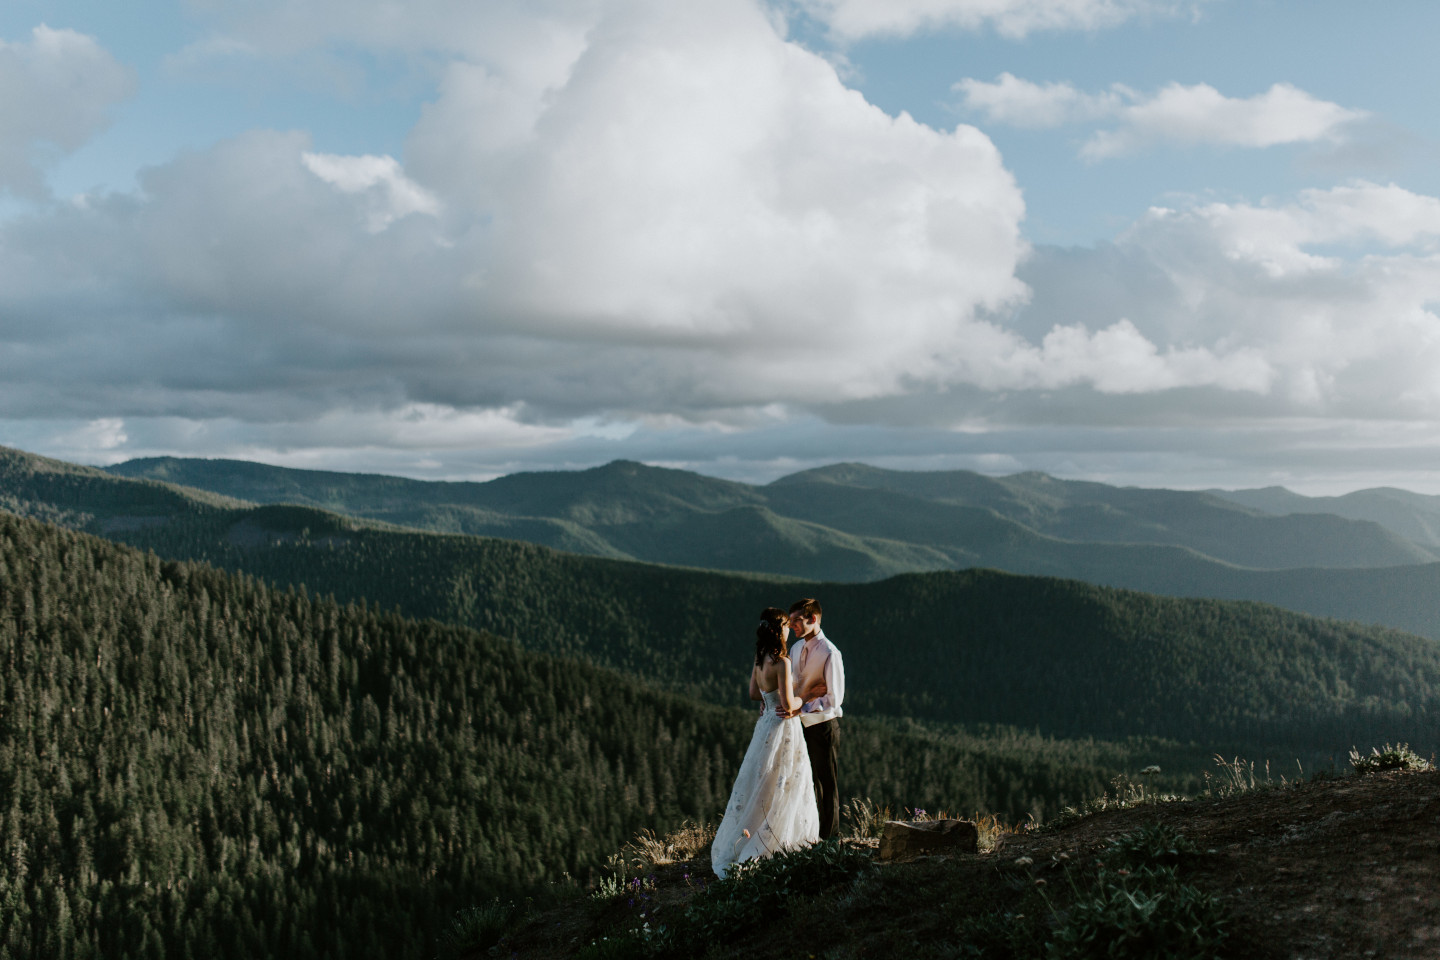 Elopement in a national park.